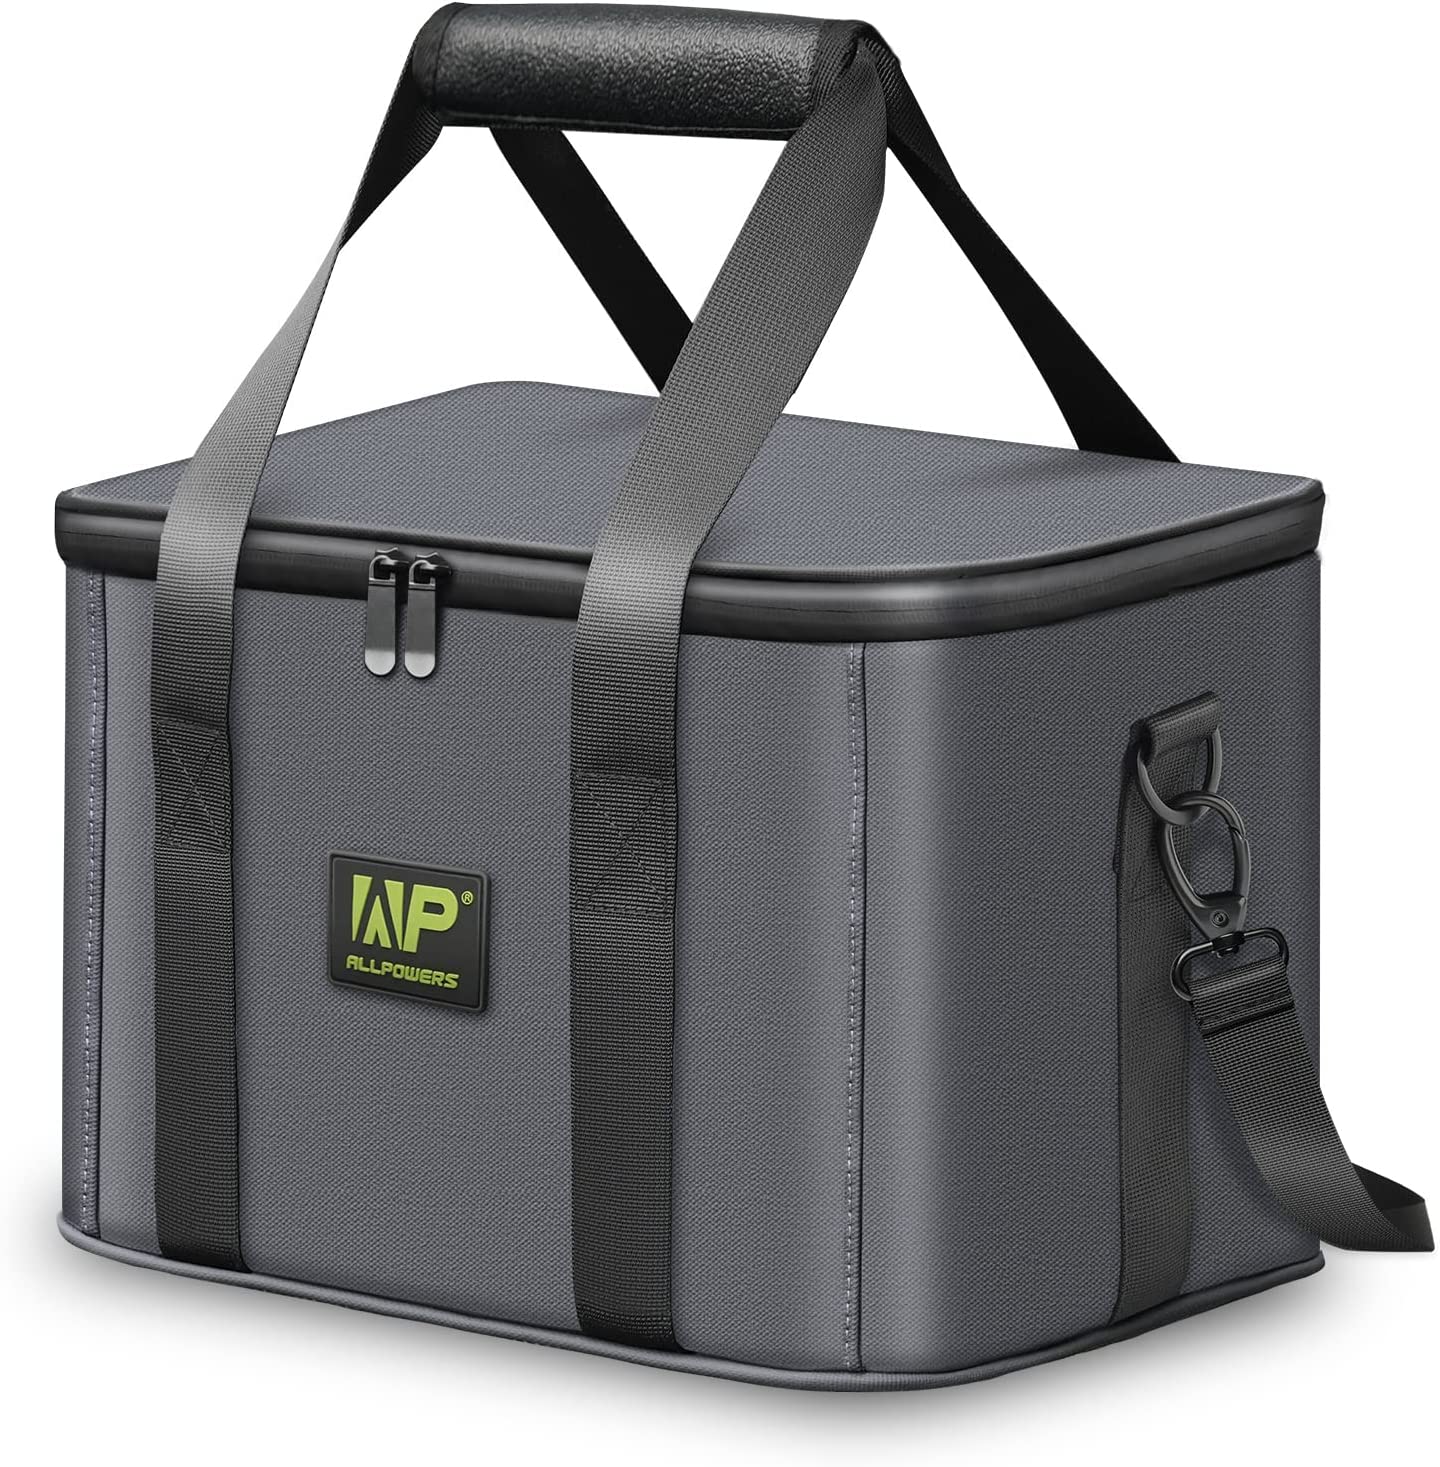 ALLPOWERS Portable Carry Bag for R600 Portable Power Station